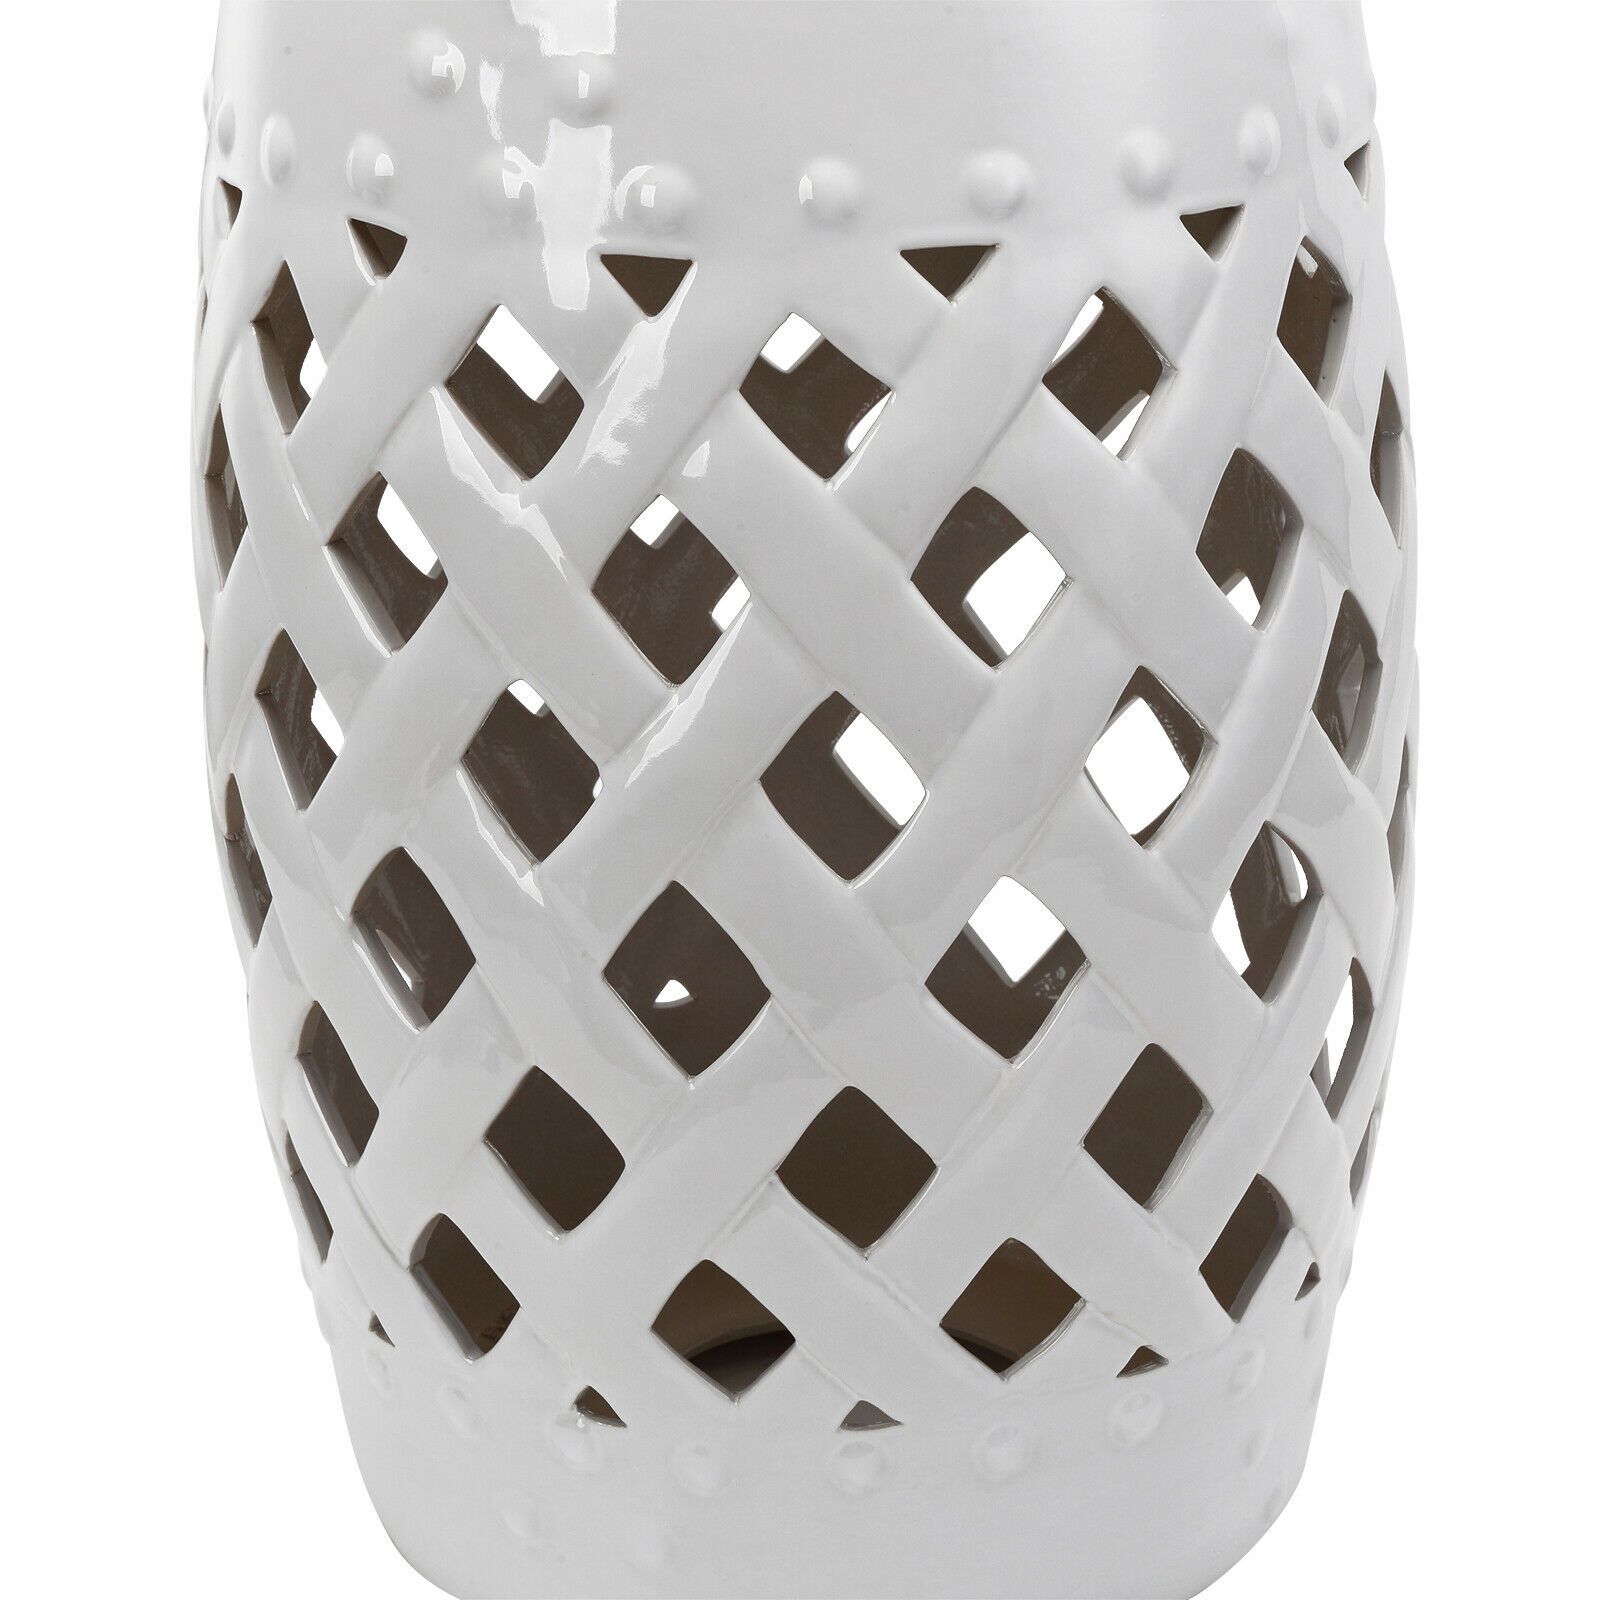 Outsunny Modern Ceramic Lattice Garden Stool Accent Table Decorative White Intended For Standwood Metal Garden Stools (View 25 of 25)